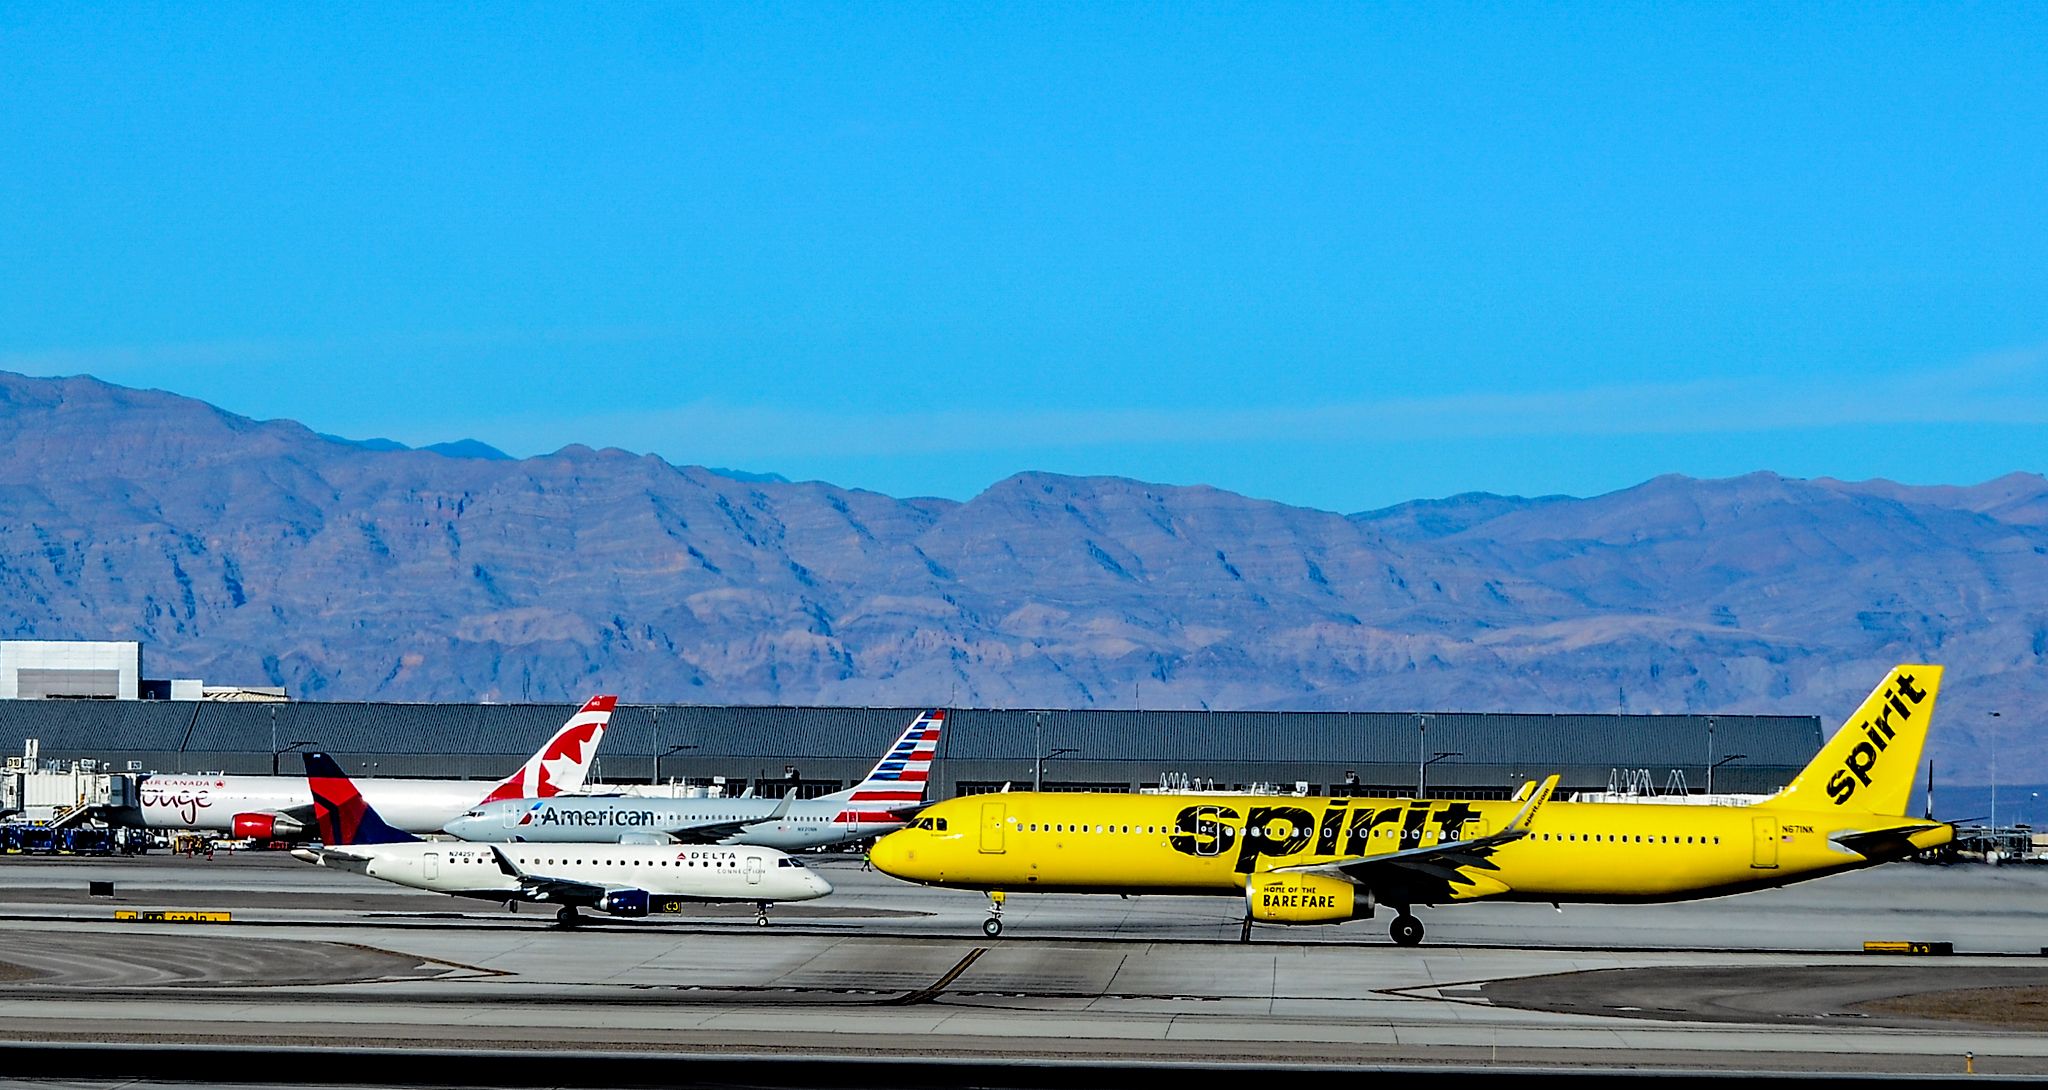 Air Canada Rouge - American Airlines - Delta Connection - Spirit Airlines at LAX